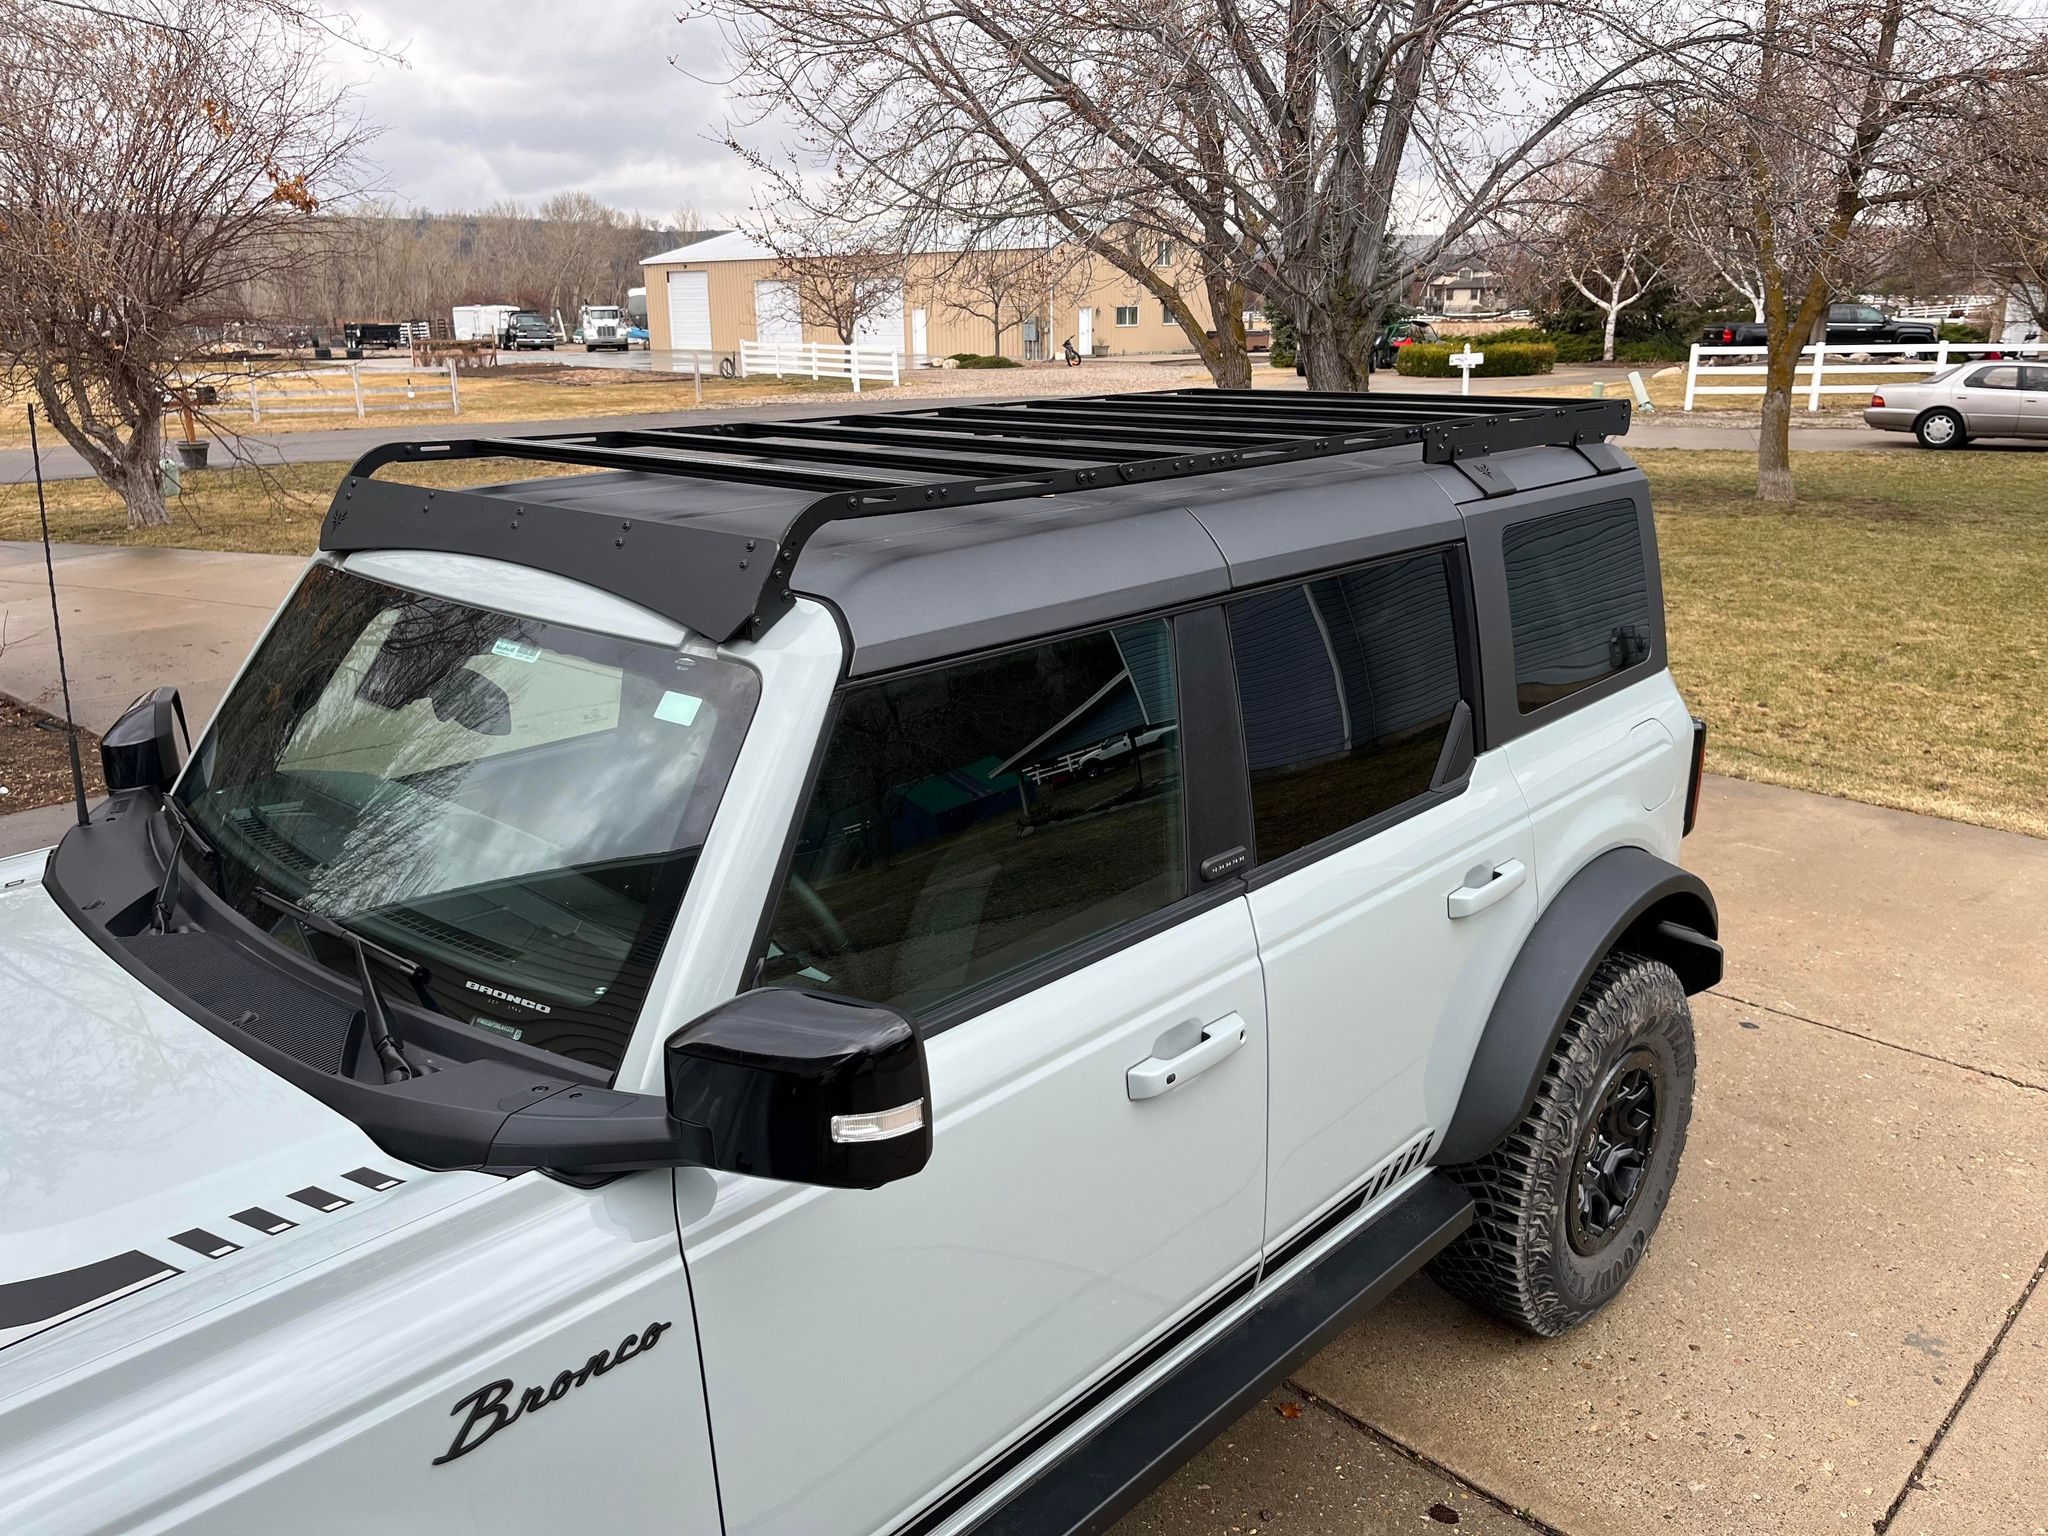 Ford Bronco What type of storage boxes are you using for your roof racks? 274654135_330238329064822_3800700221500247966_